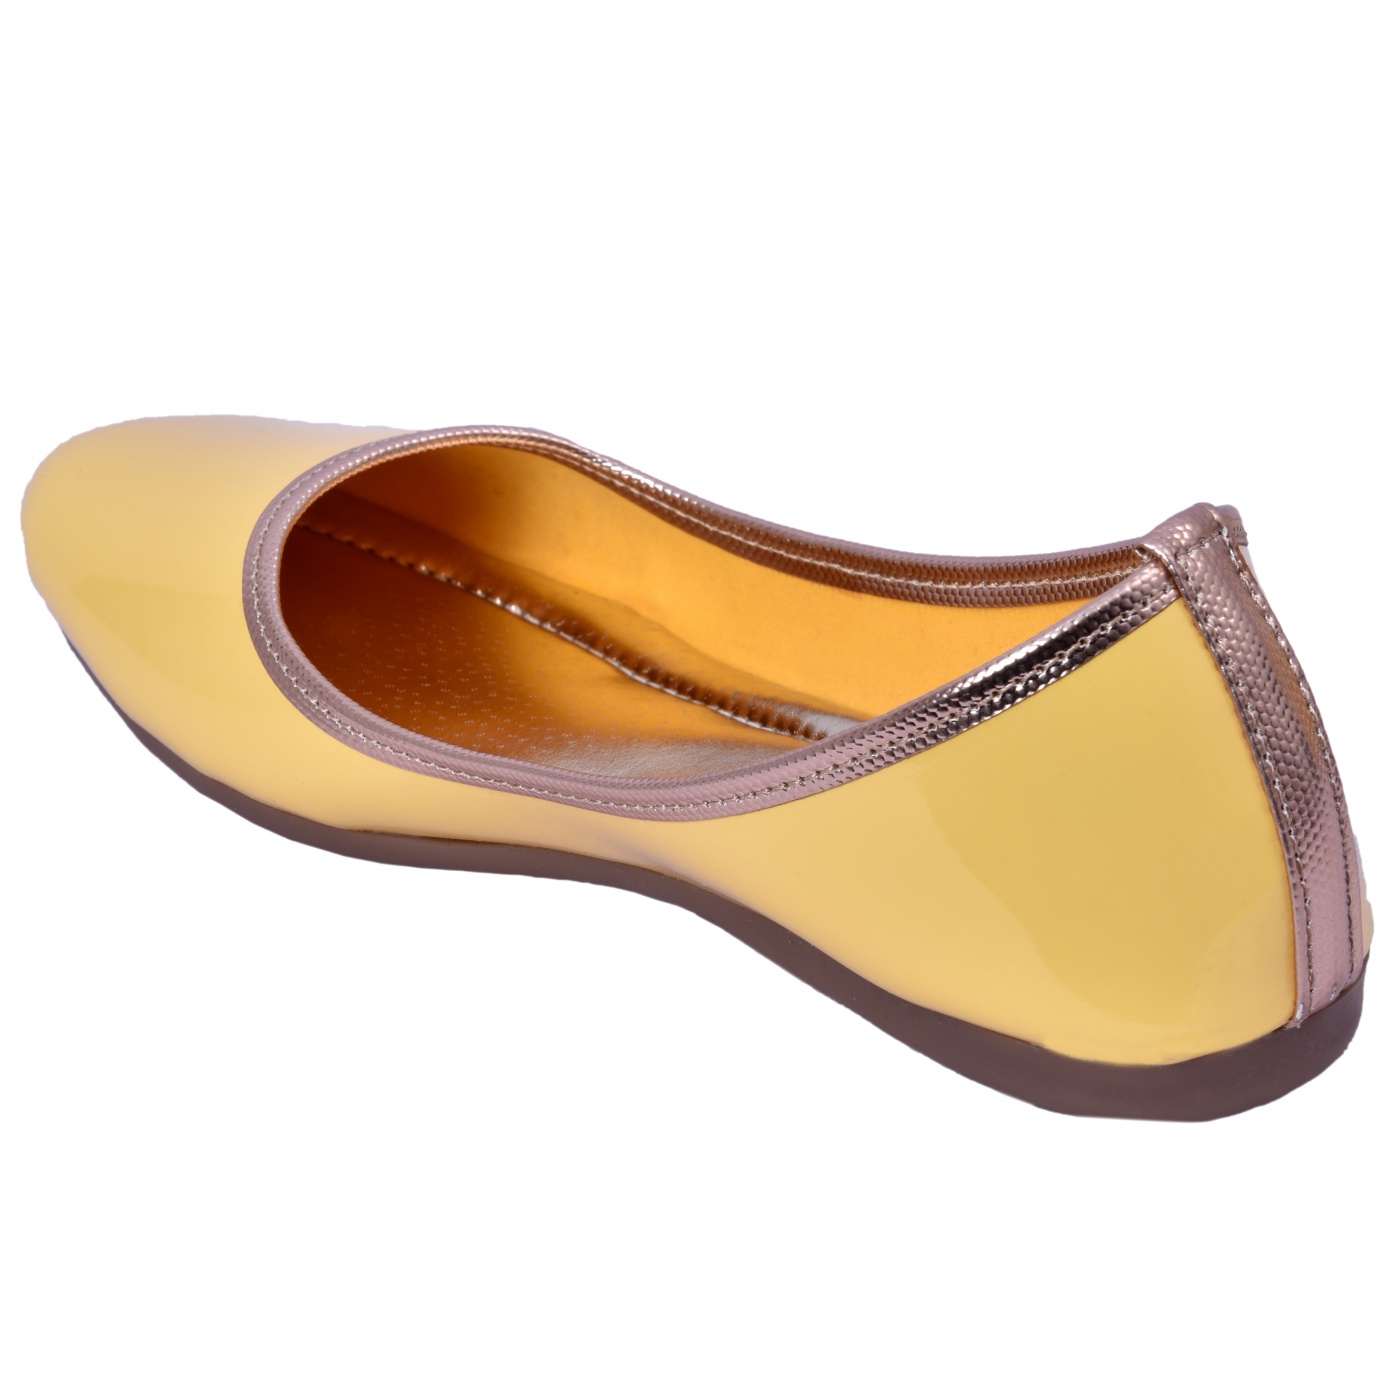 Flat Belly Shoes - National Handloom Corporation